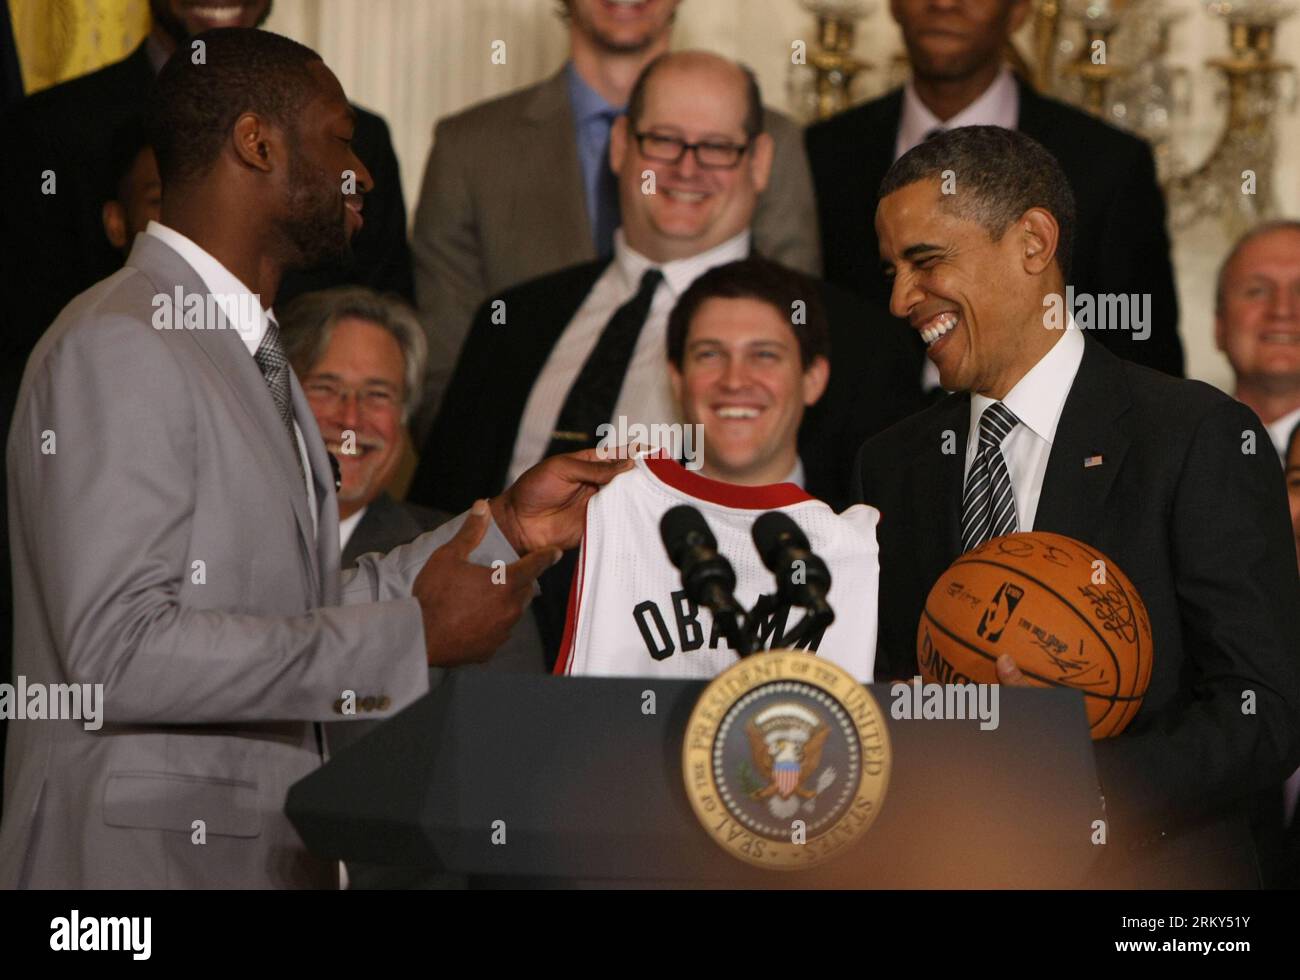 Bildnummer: 59145802  Datum: 28.01.2013  Copyright: imago/Xinhua (130129) -- WASHINGTON D.C., Jan. 29,2013 (Xinhua) -- Miami Heat player Dwyane Wade (L) presents a team shirt as a gift to U.S. President Barack Obama during an event to honor the NBA champion Miami Heat at the White House in Washington D.C., the United States, Jan. 28, 2013. (Xinhua/Fang Zhe) US-WASHINGTON D.C.-NBA-OBAMA PUBLICATIONxNOTxINxCHN People Politik USA Basketball xns x0x 2013 quer Aufmacher premiumd      59145802 Date 28 01 2013 Copyright Imago XINHUA  Washington D C Jan 29 2013 XINHUA Miami Heat Player  Calf l Present Stock Photo